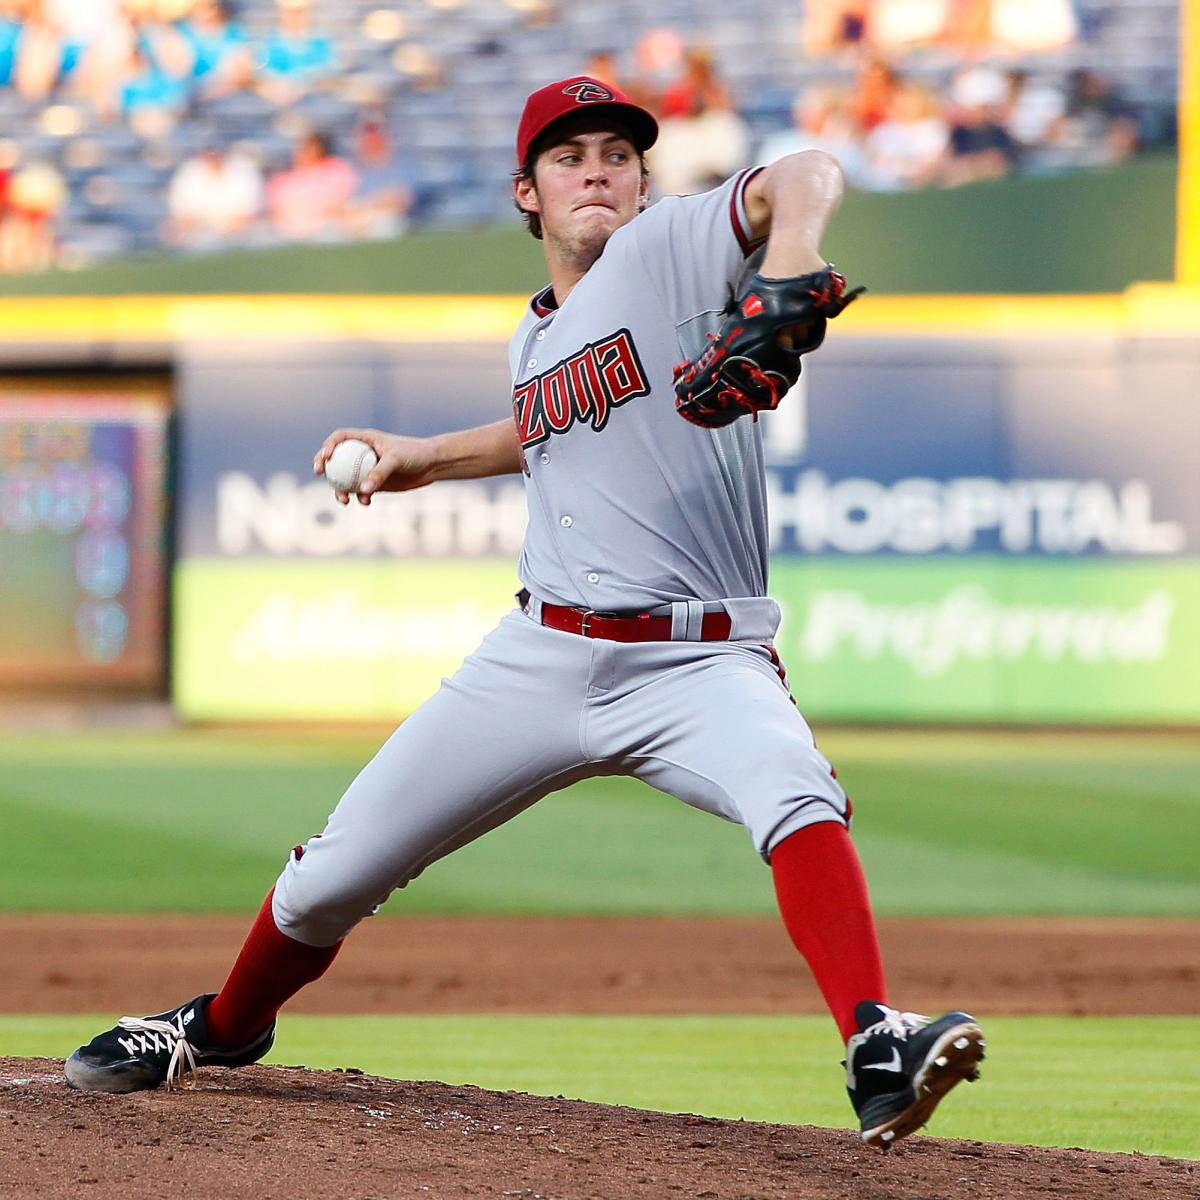 MLB Prospects Hottest Pitching Prospects at Every Minor League Level